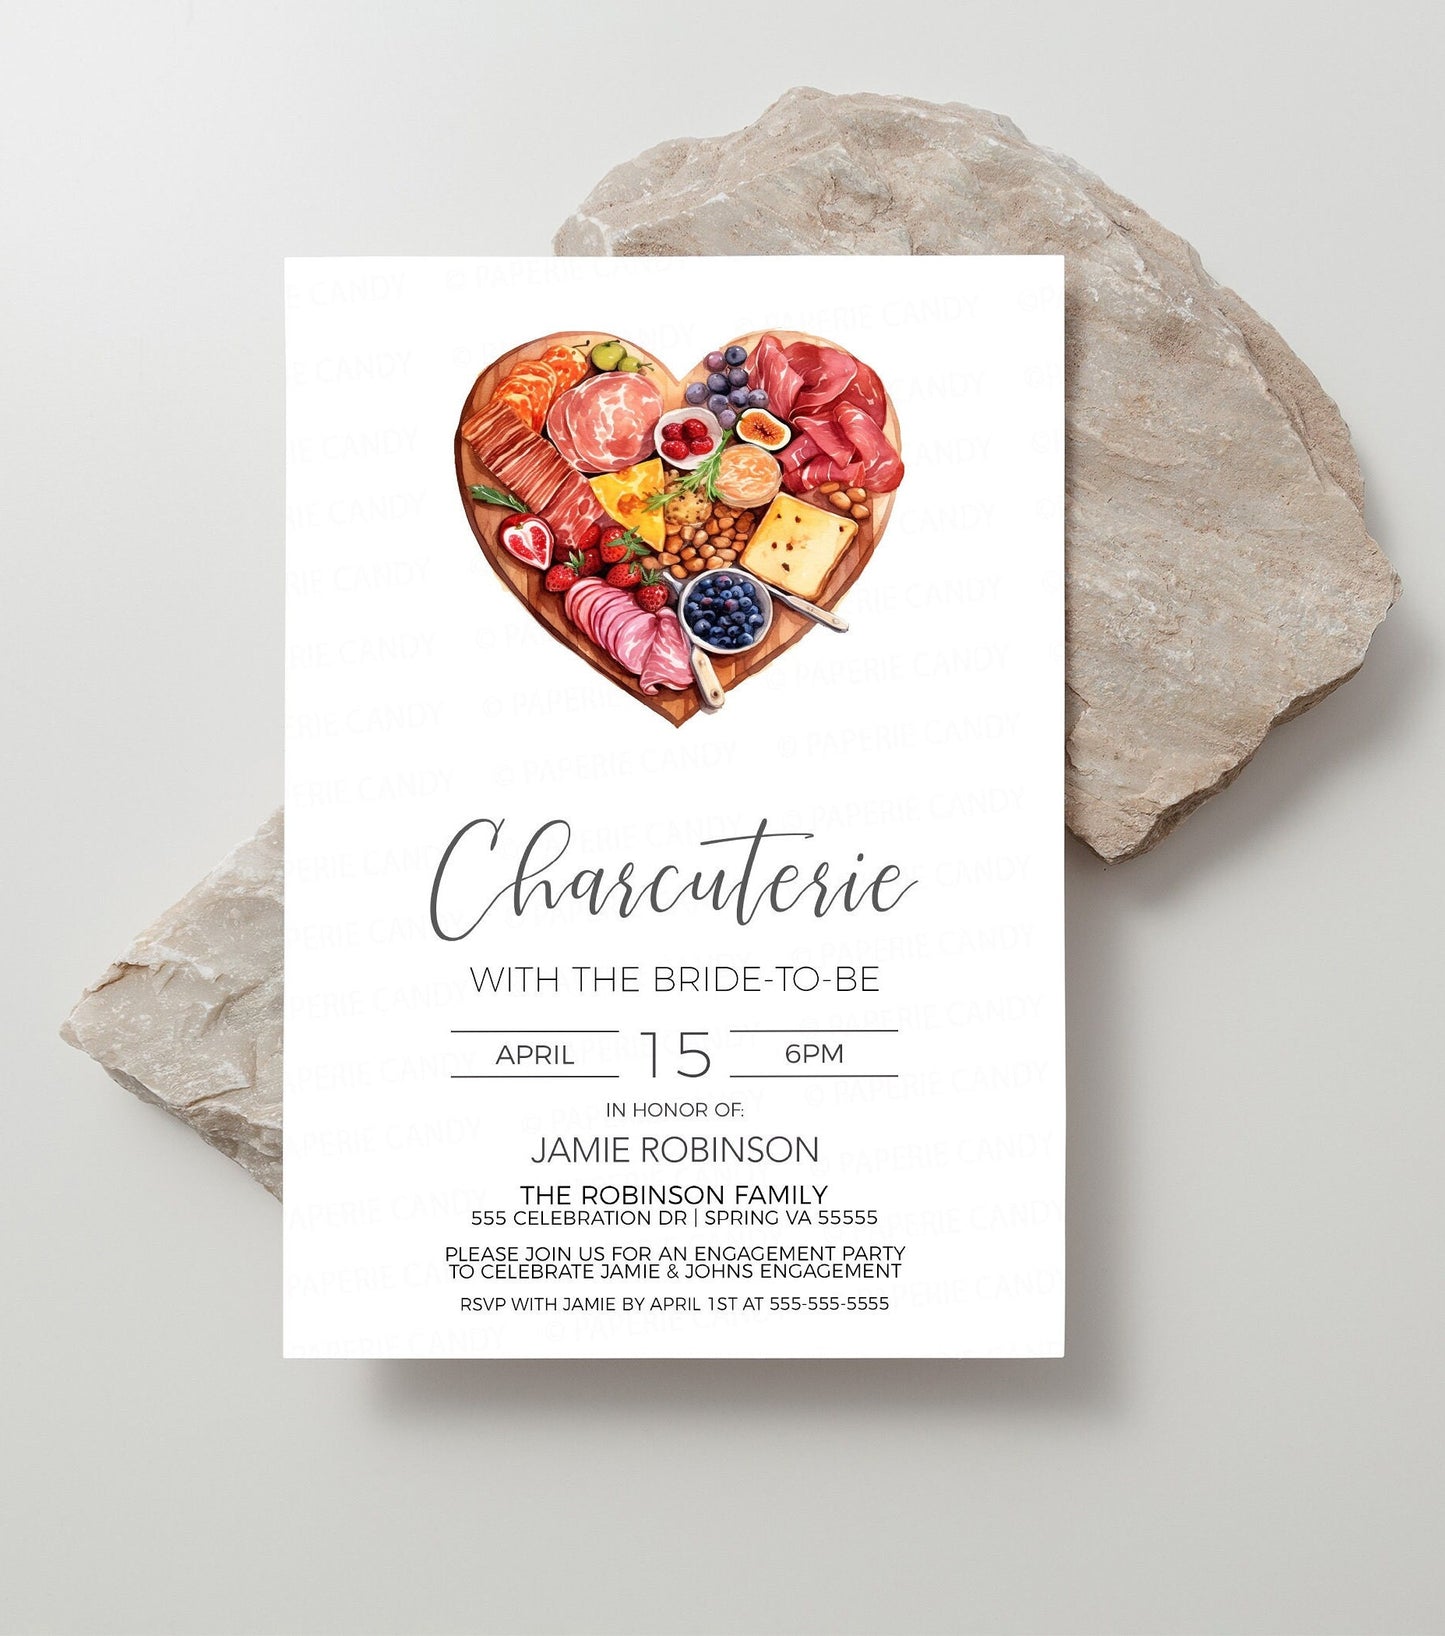 Charcuterie Bridal Shower Invitation, Charcuterie Board Engagement Invite, Charcuterie With The Bride, Editable Printable Template